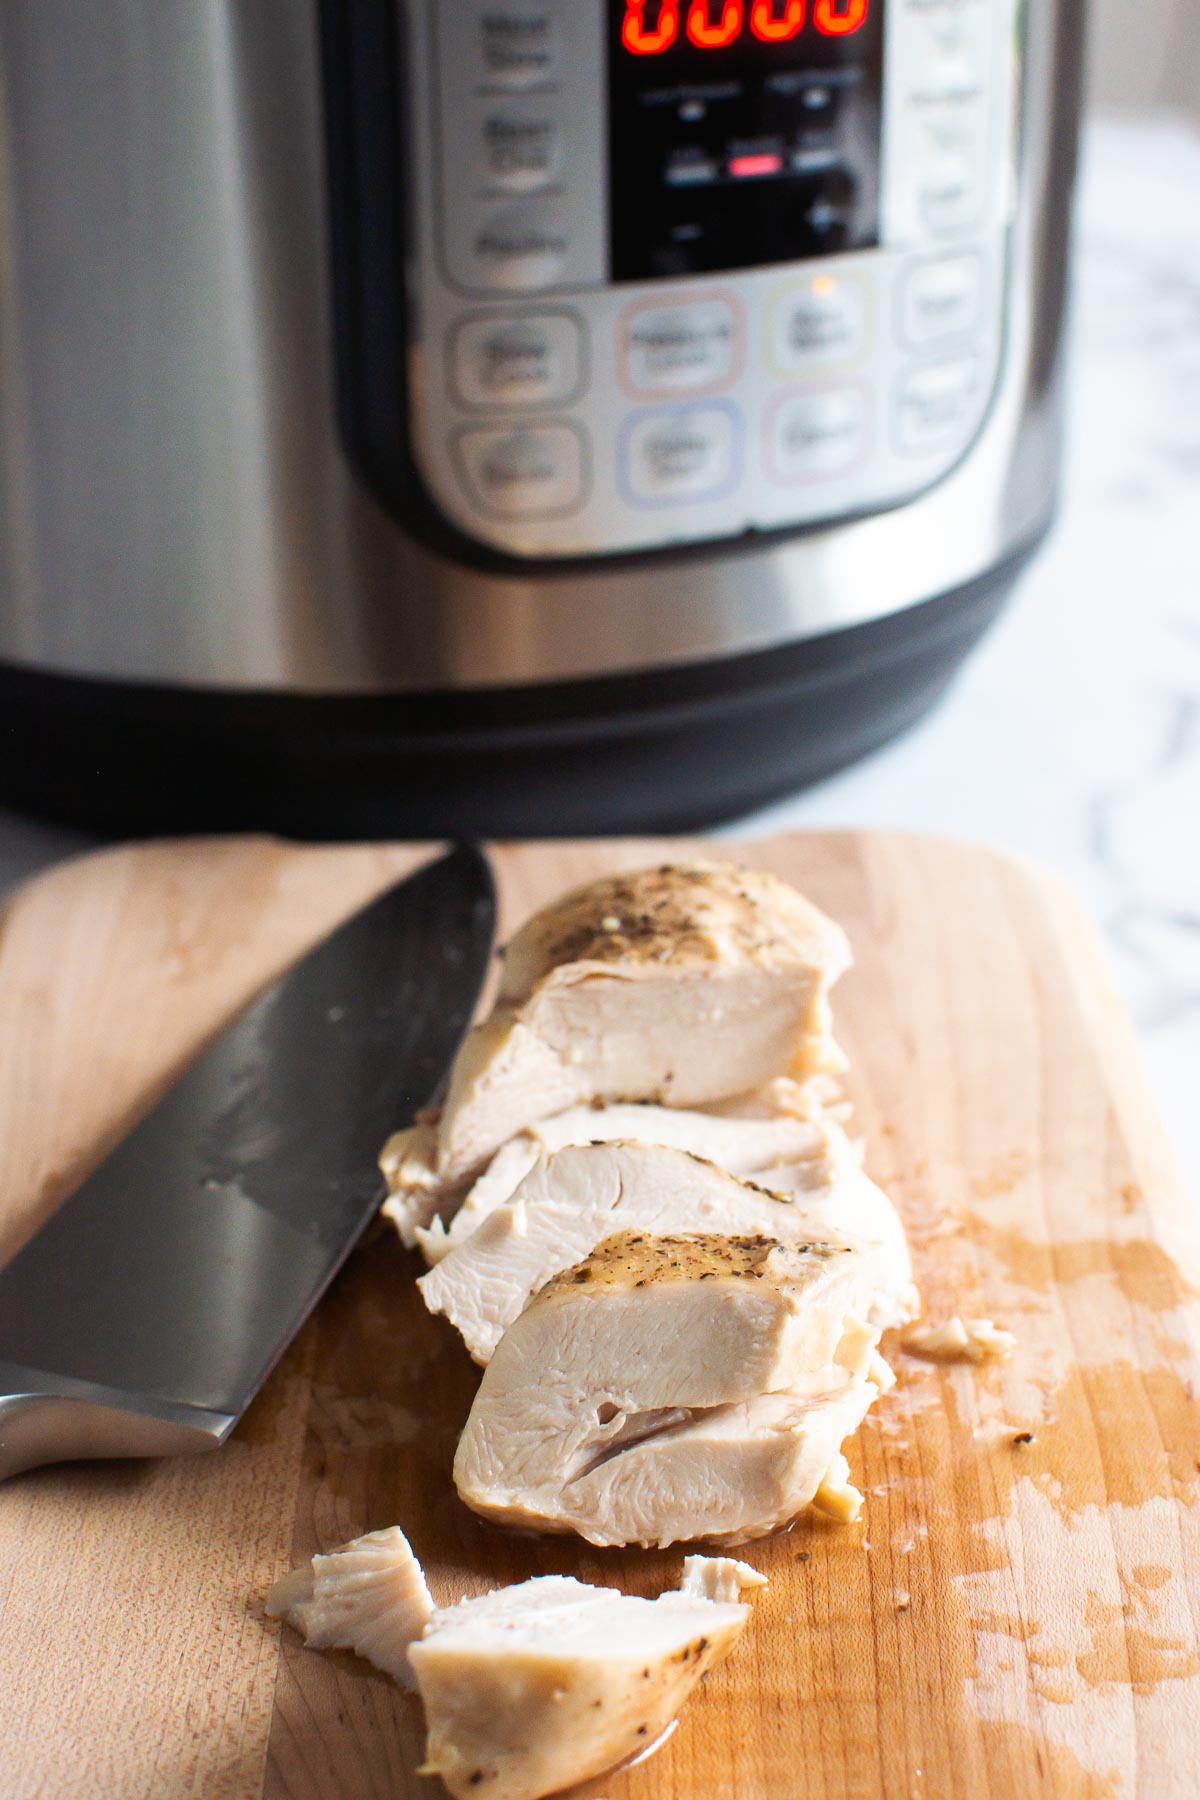 Sliced chicken breast on a cutting board with Instant Pot in background.